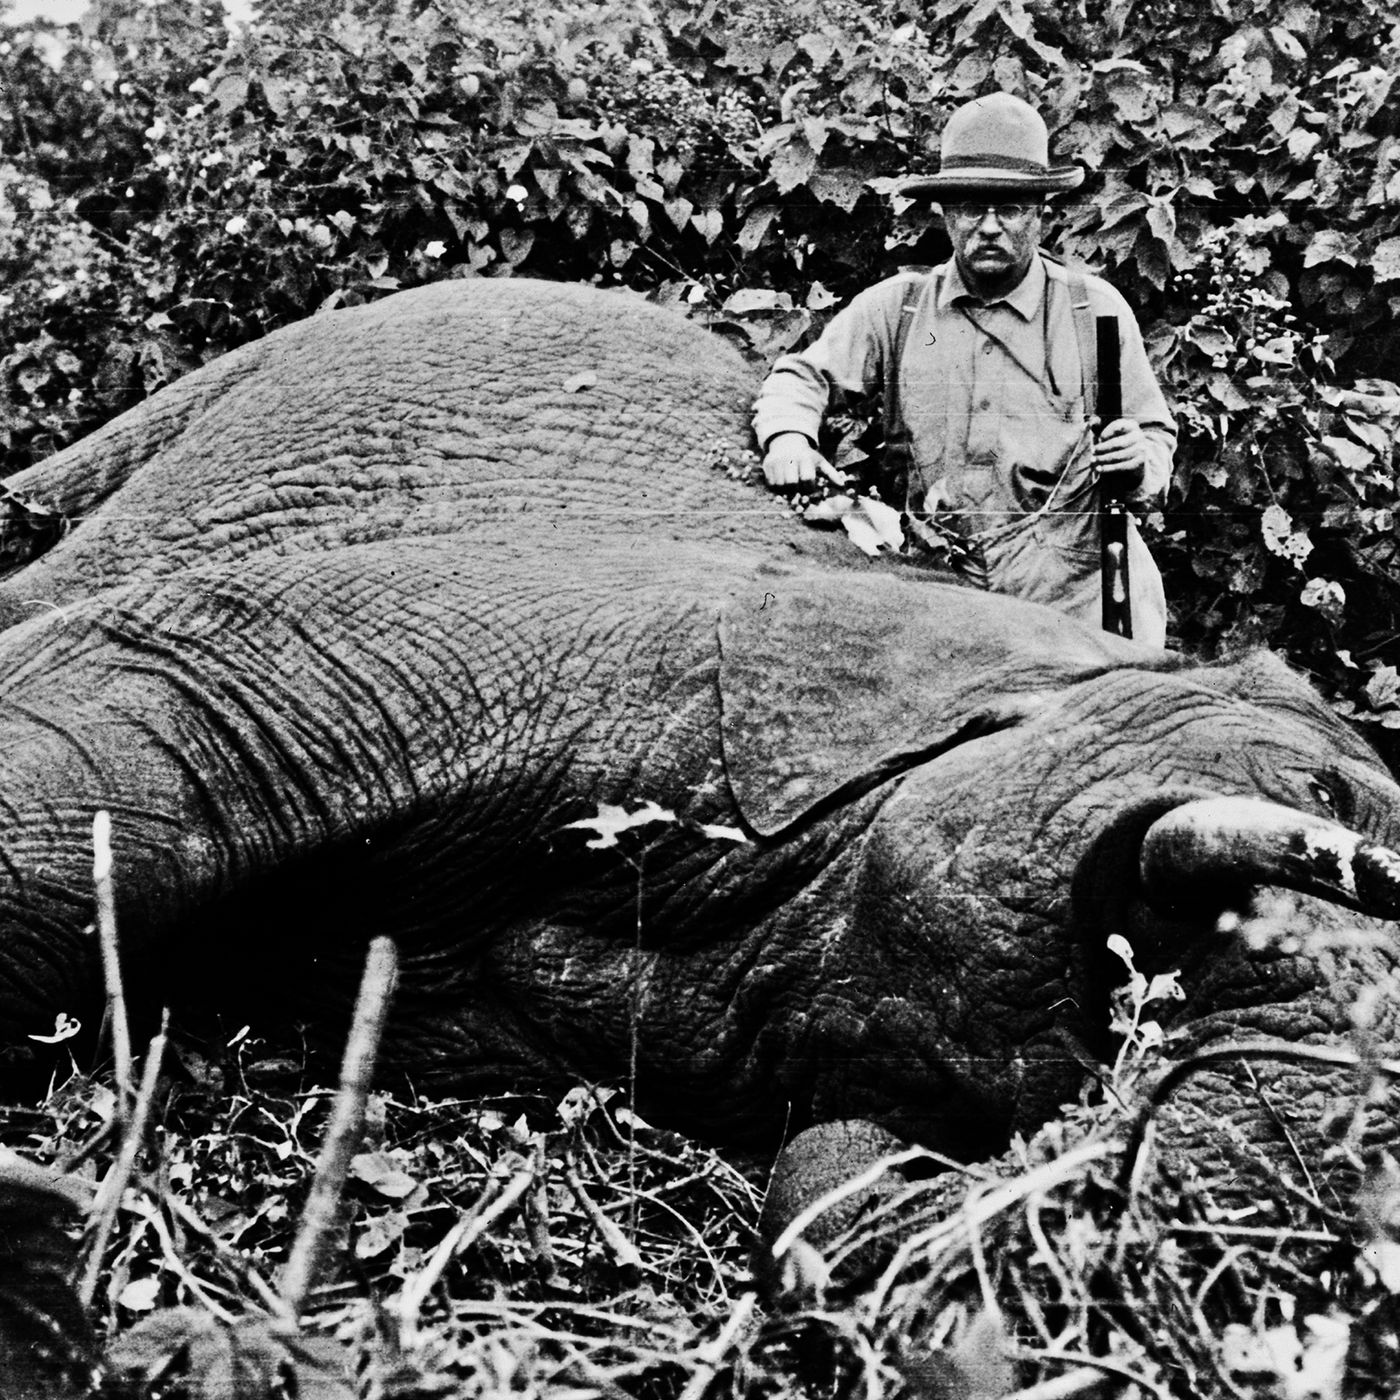 All 512 animals Teddy Roosevelt and his son killed on safari - Vox